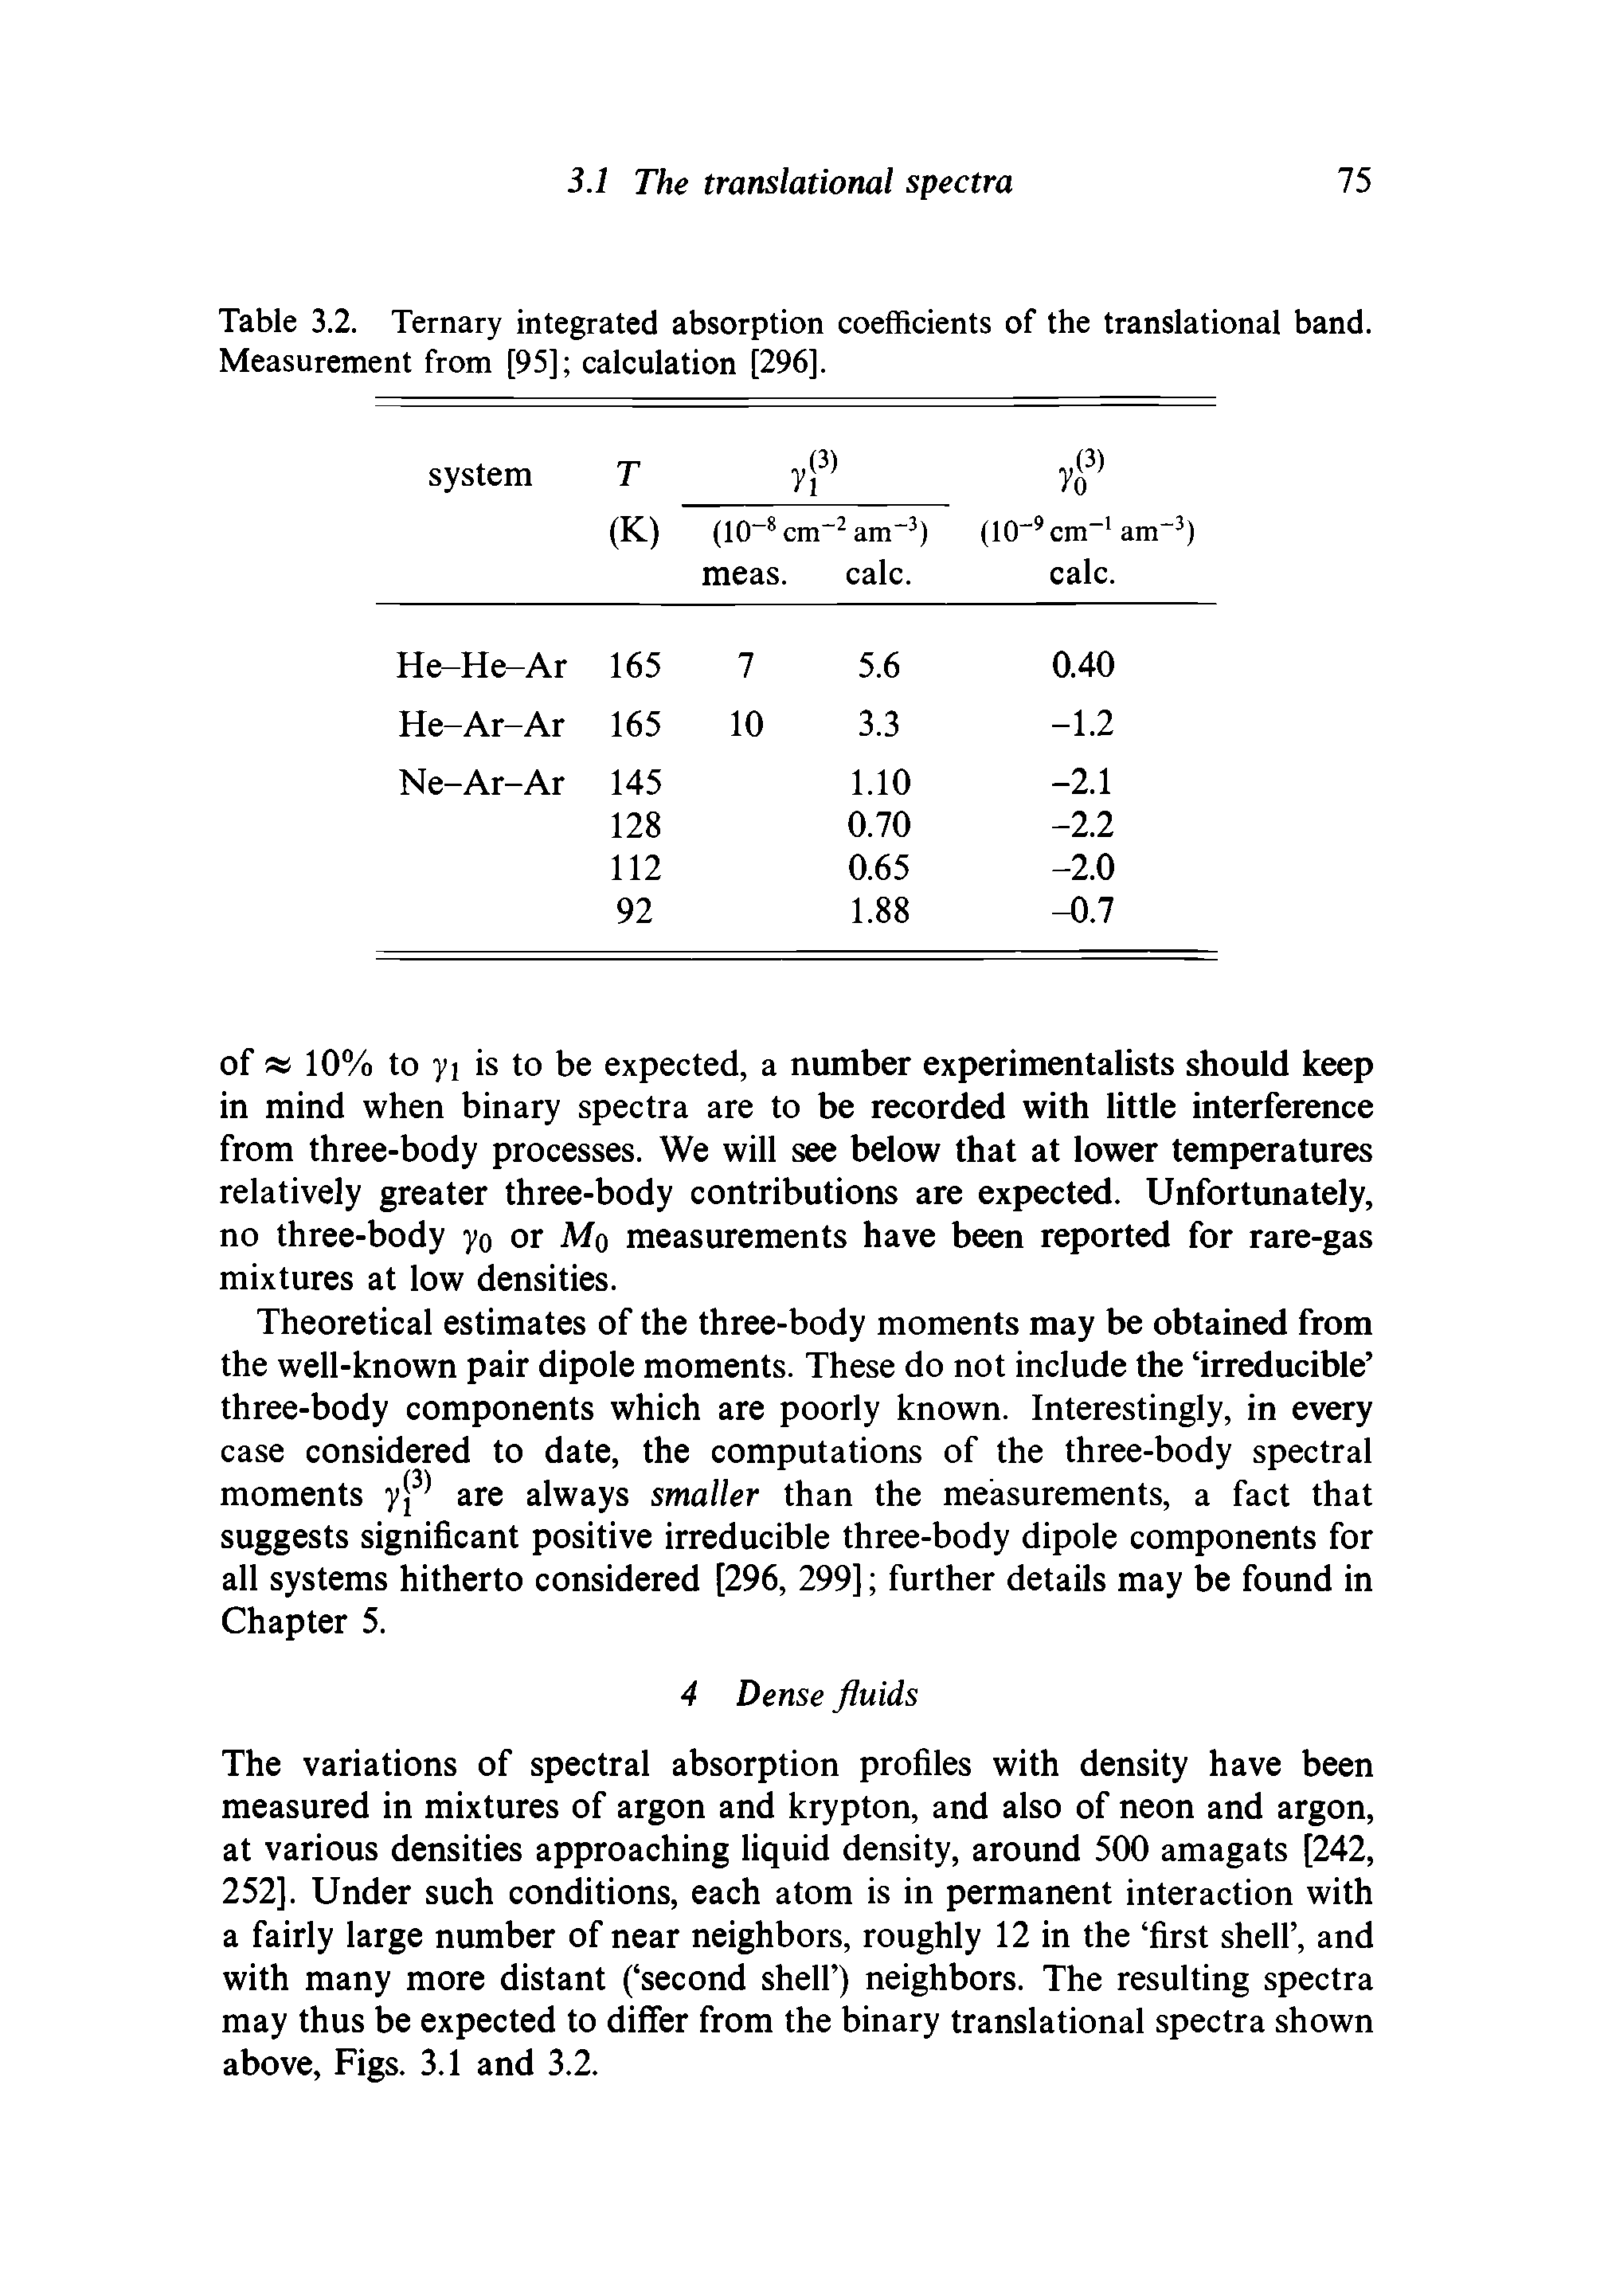 Table 3.2. Ternary integrated absorption coefficients of the translational band. Measurement from [95] calculation [296],...